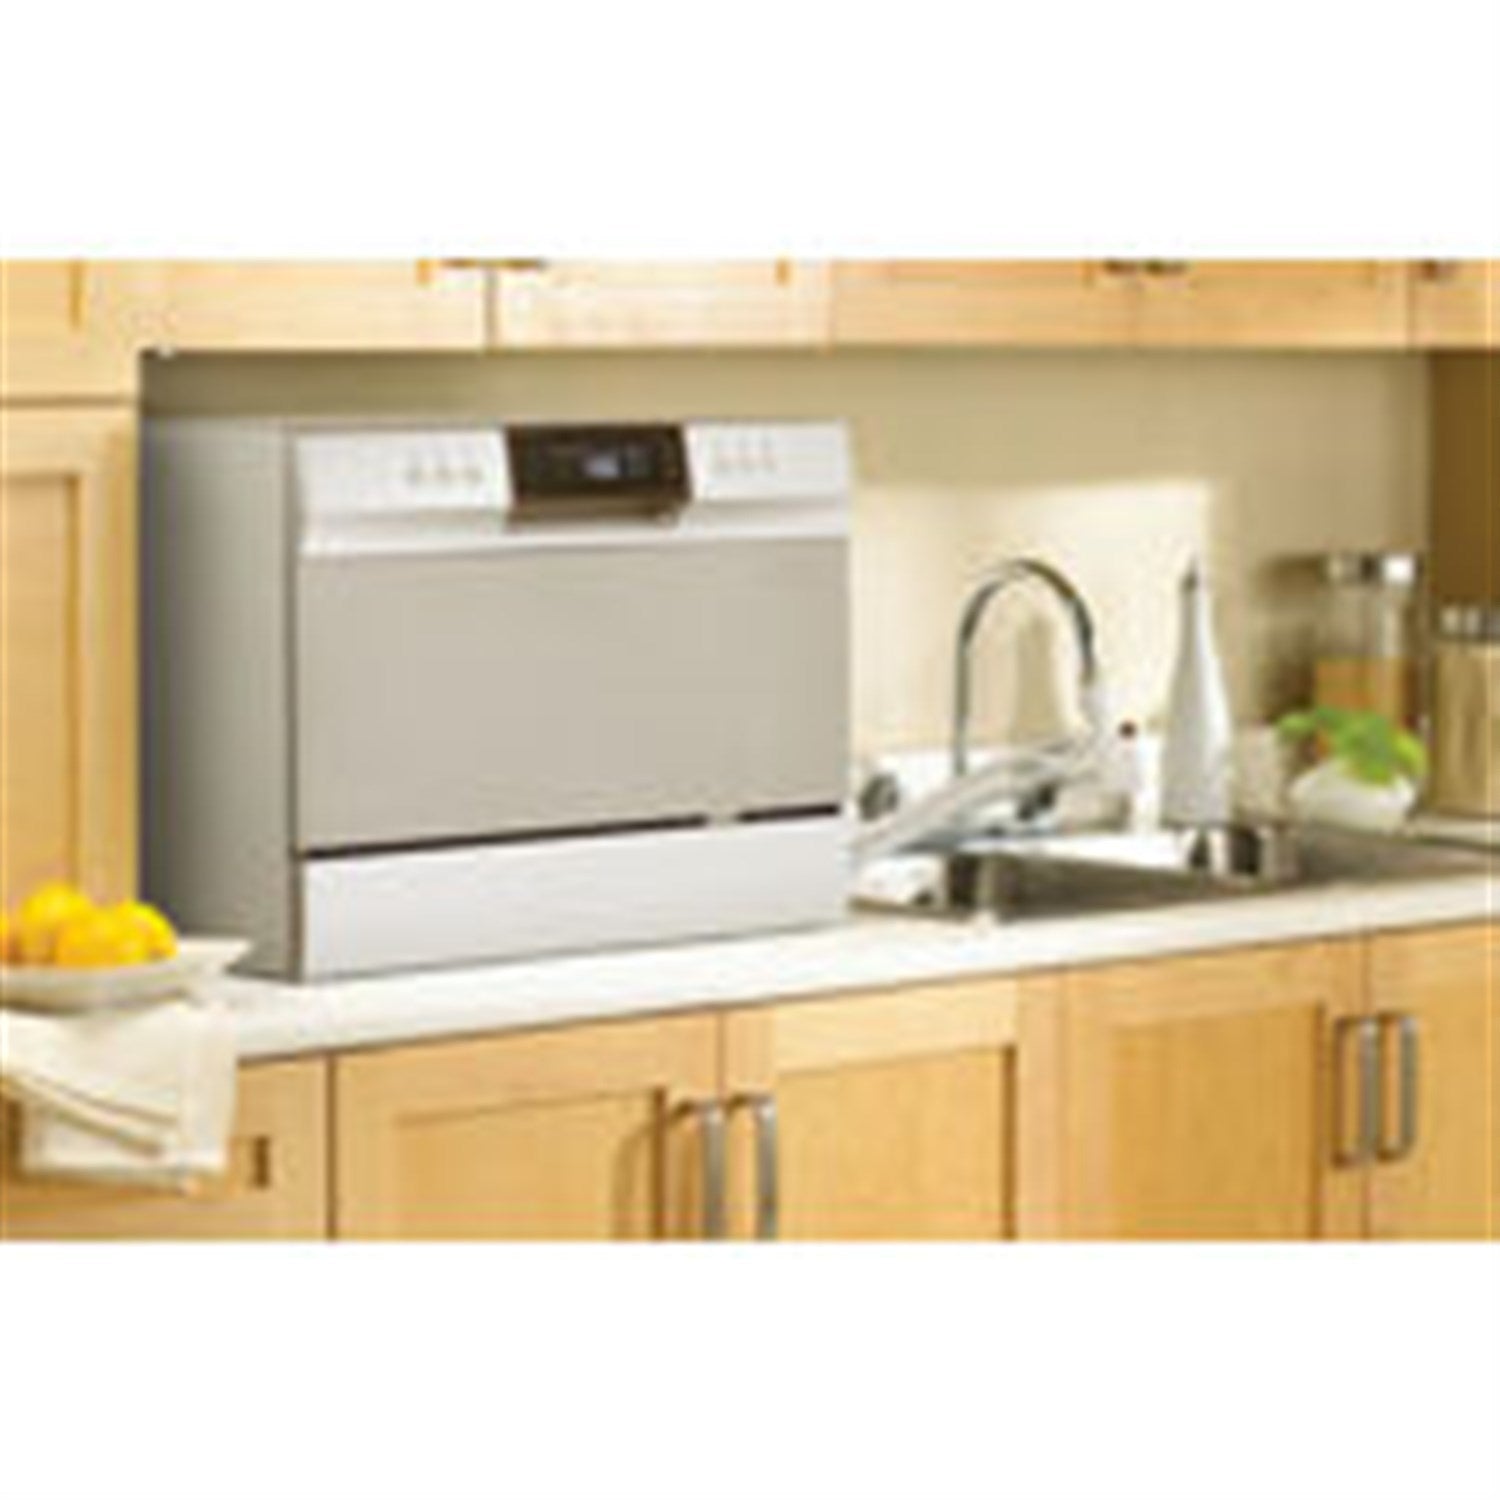 Countertop Dishwasher 6 Place Setting SS Interior